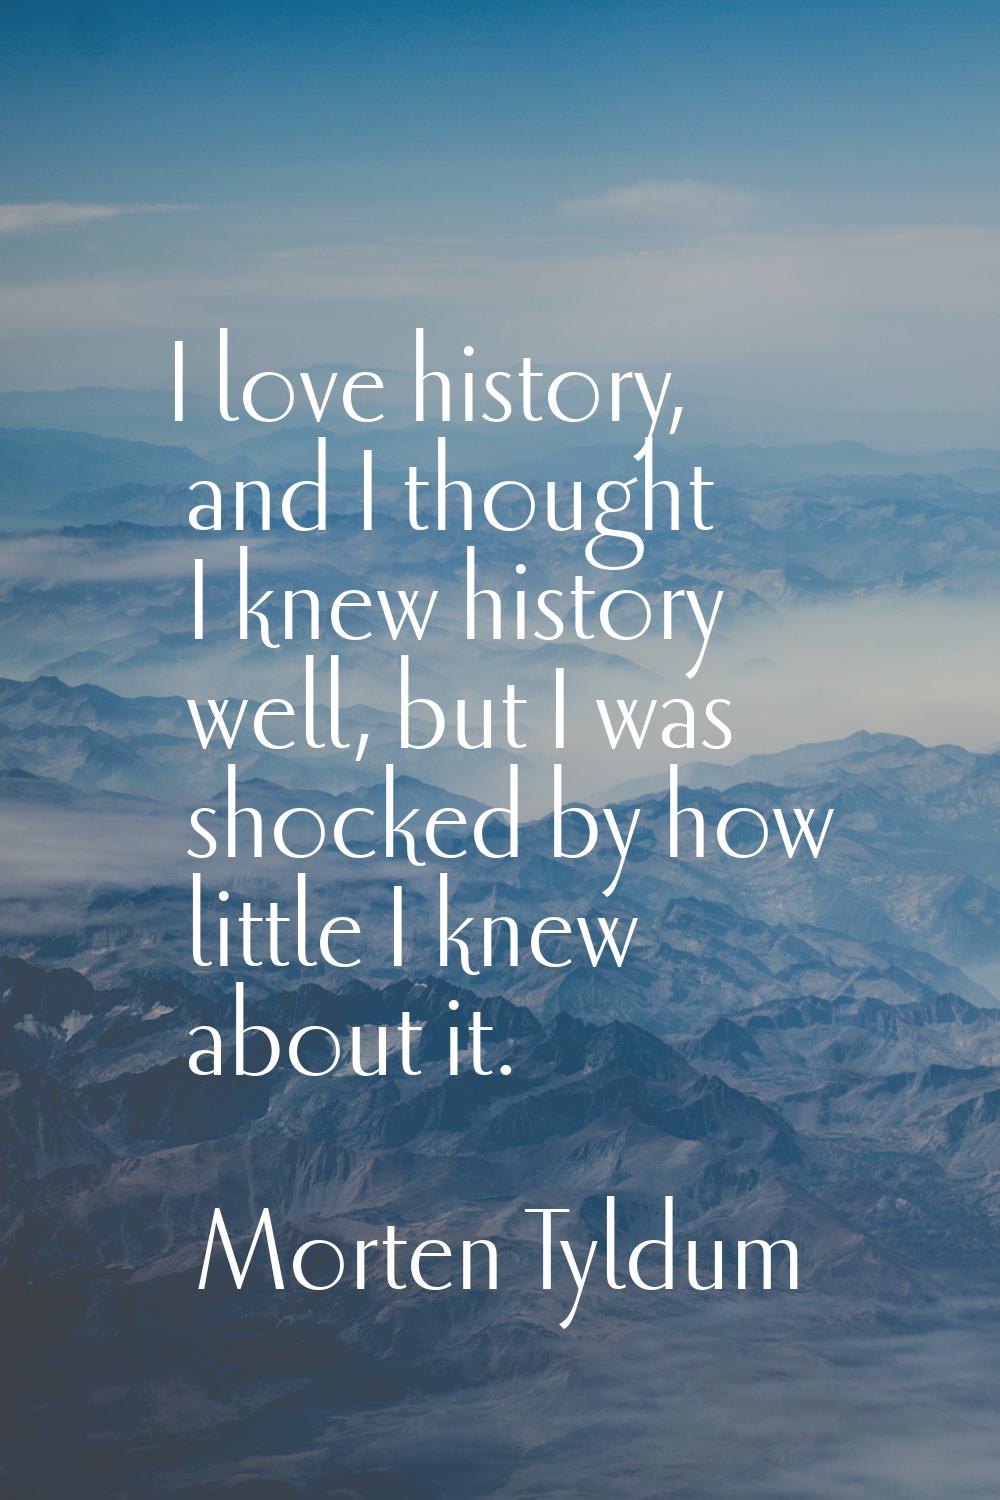 I love history, and I thought I knew history well, but I was shocked by how little I knew about it.